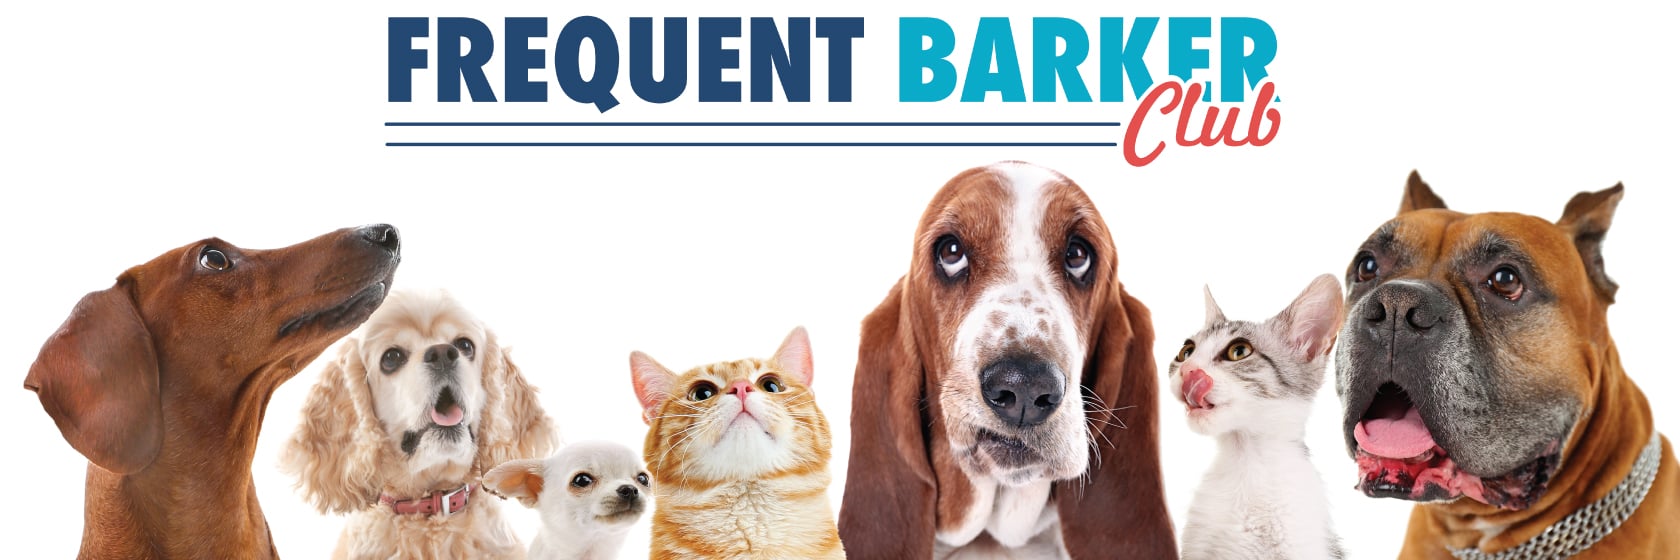 frequent buyer club banner